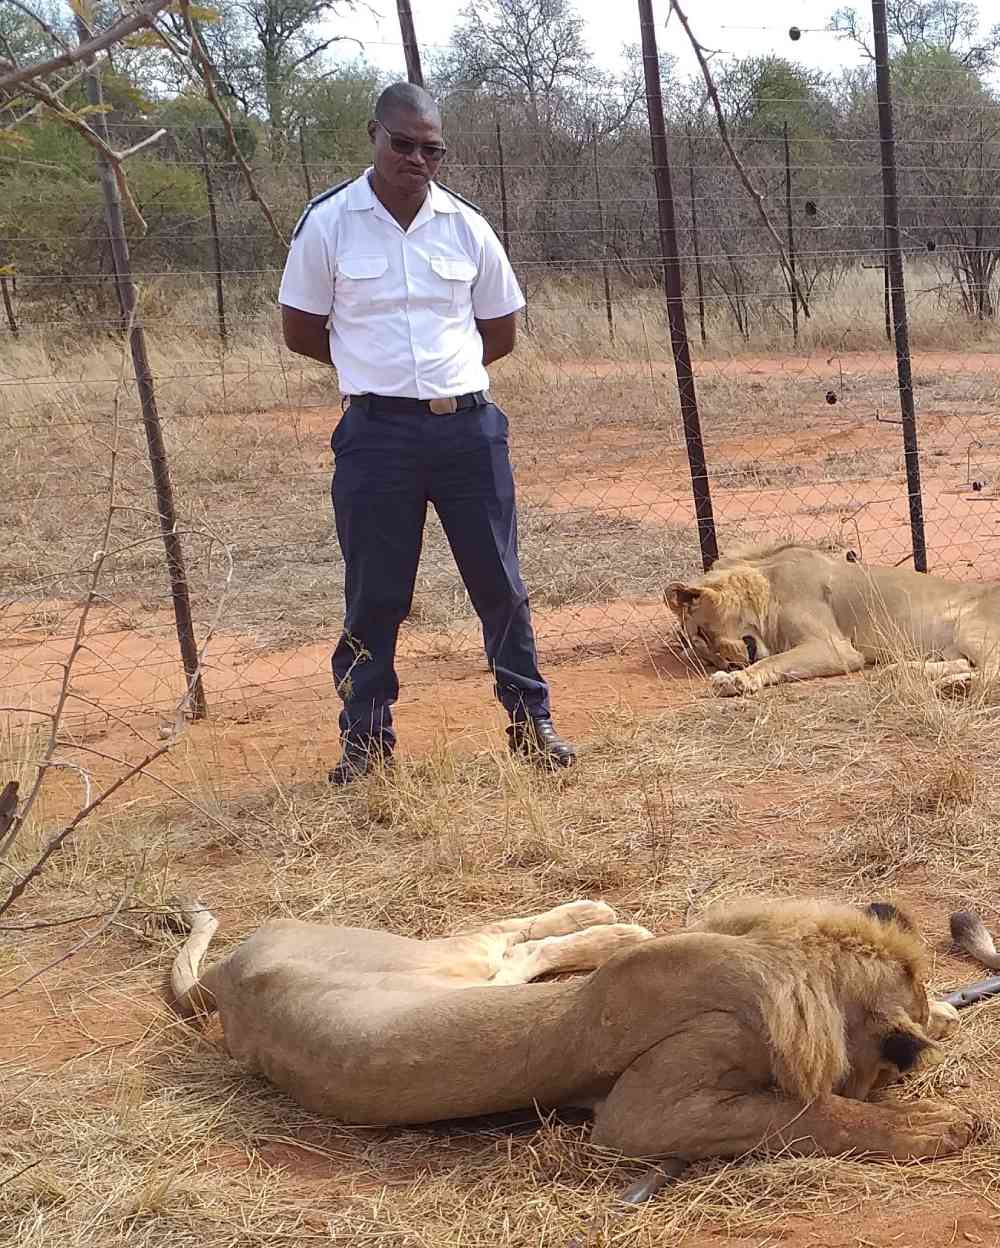 NSPCA inspector Matt with relocated Captive Lions